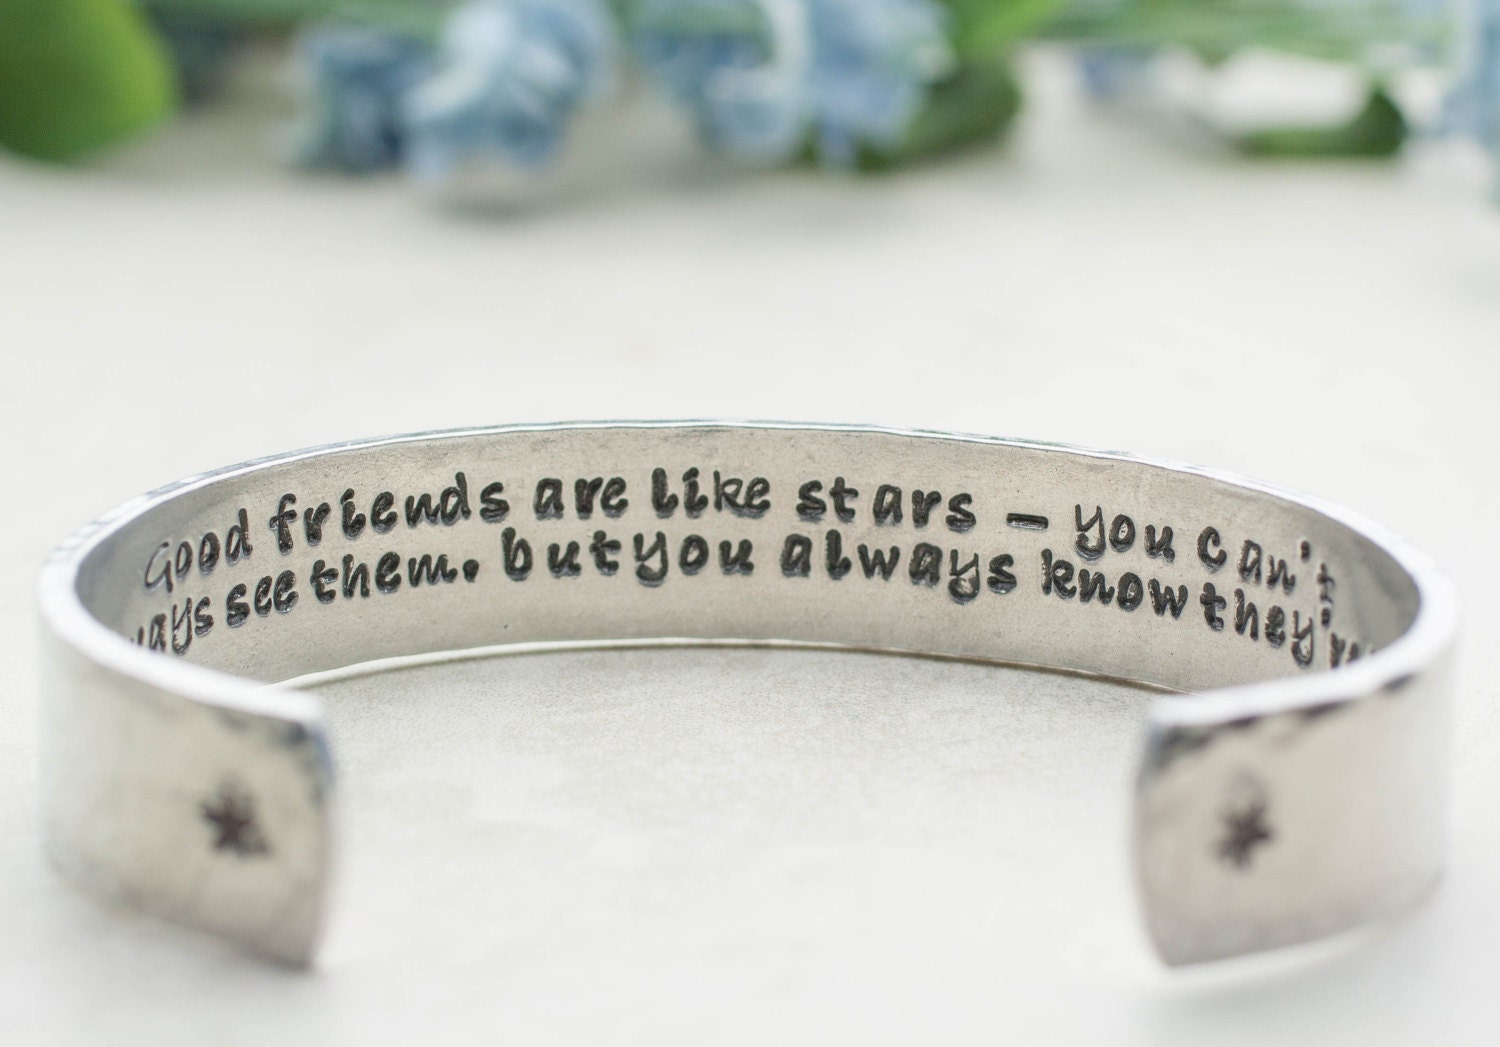 Best Friends Gift, BFF Gift, Gift for Friend, Friends are Like Stars, Friendship, Galentine's Day, Long Distance Friendship, Birthday Gift